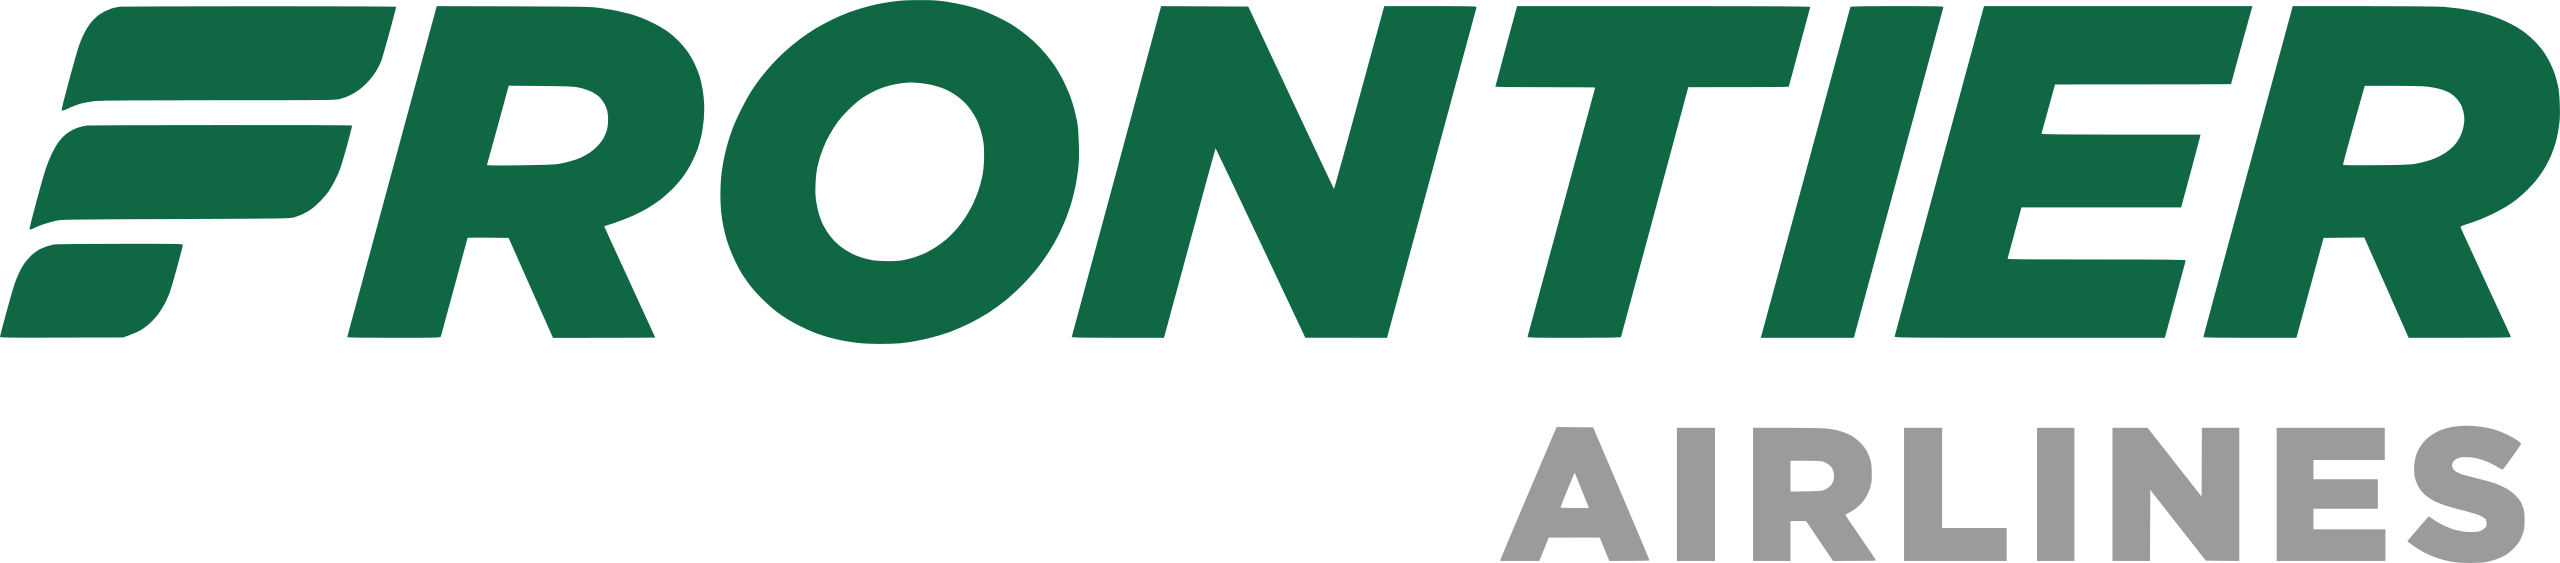 Frontier_Airlines_logo.svg